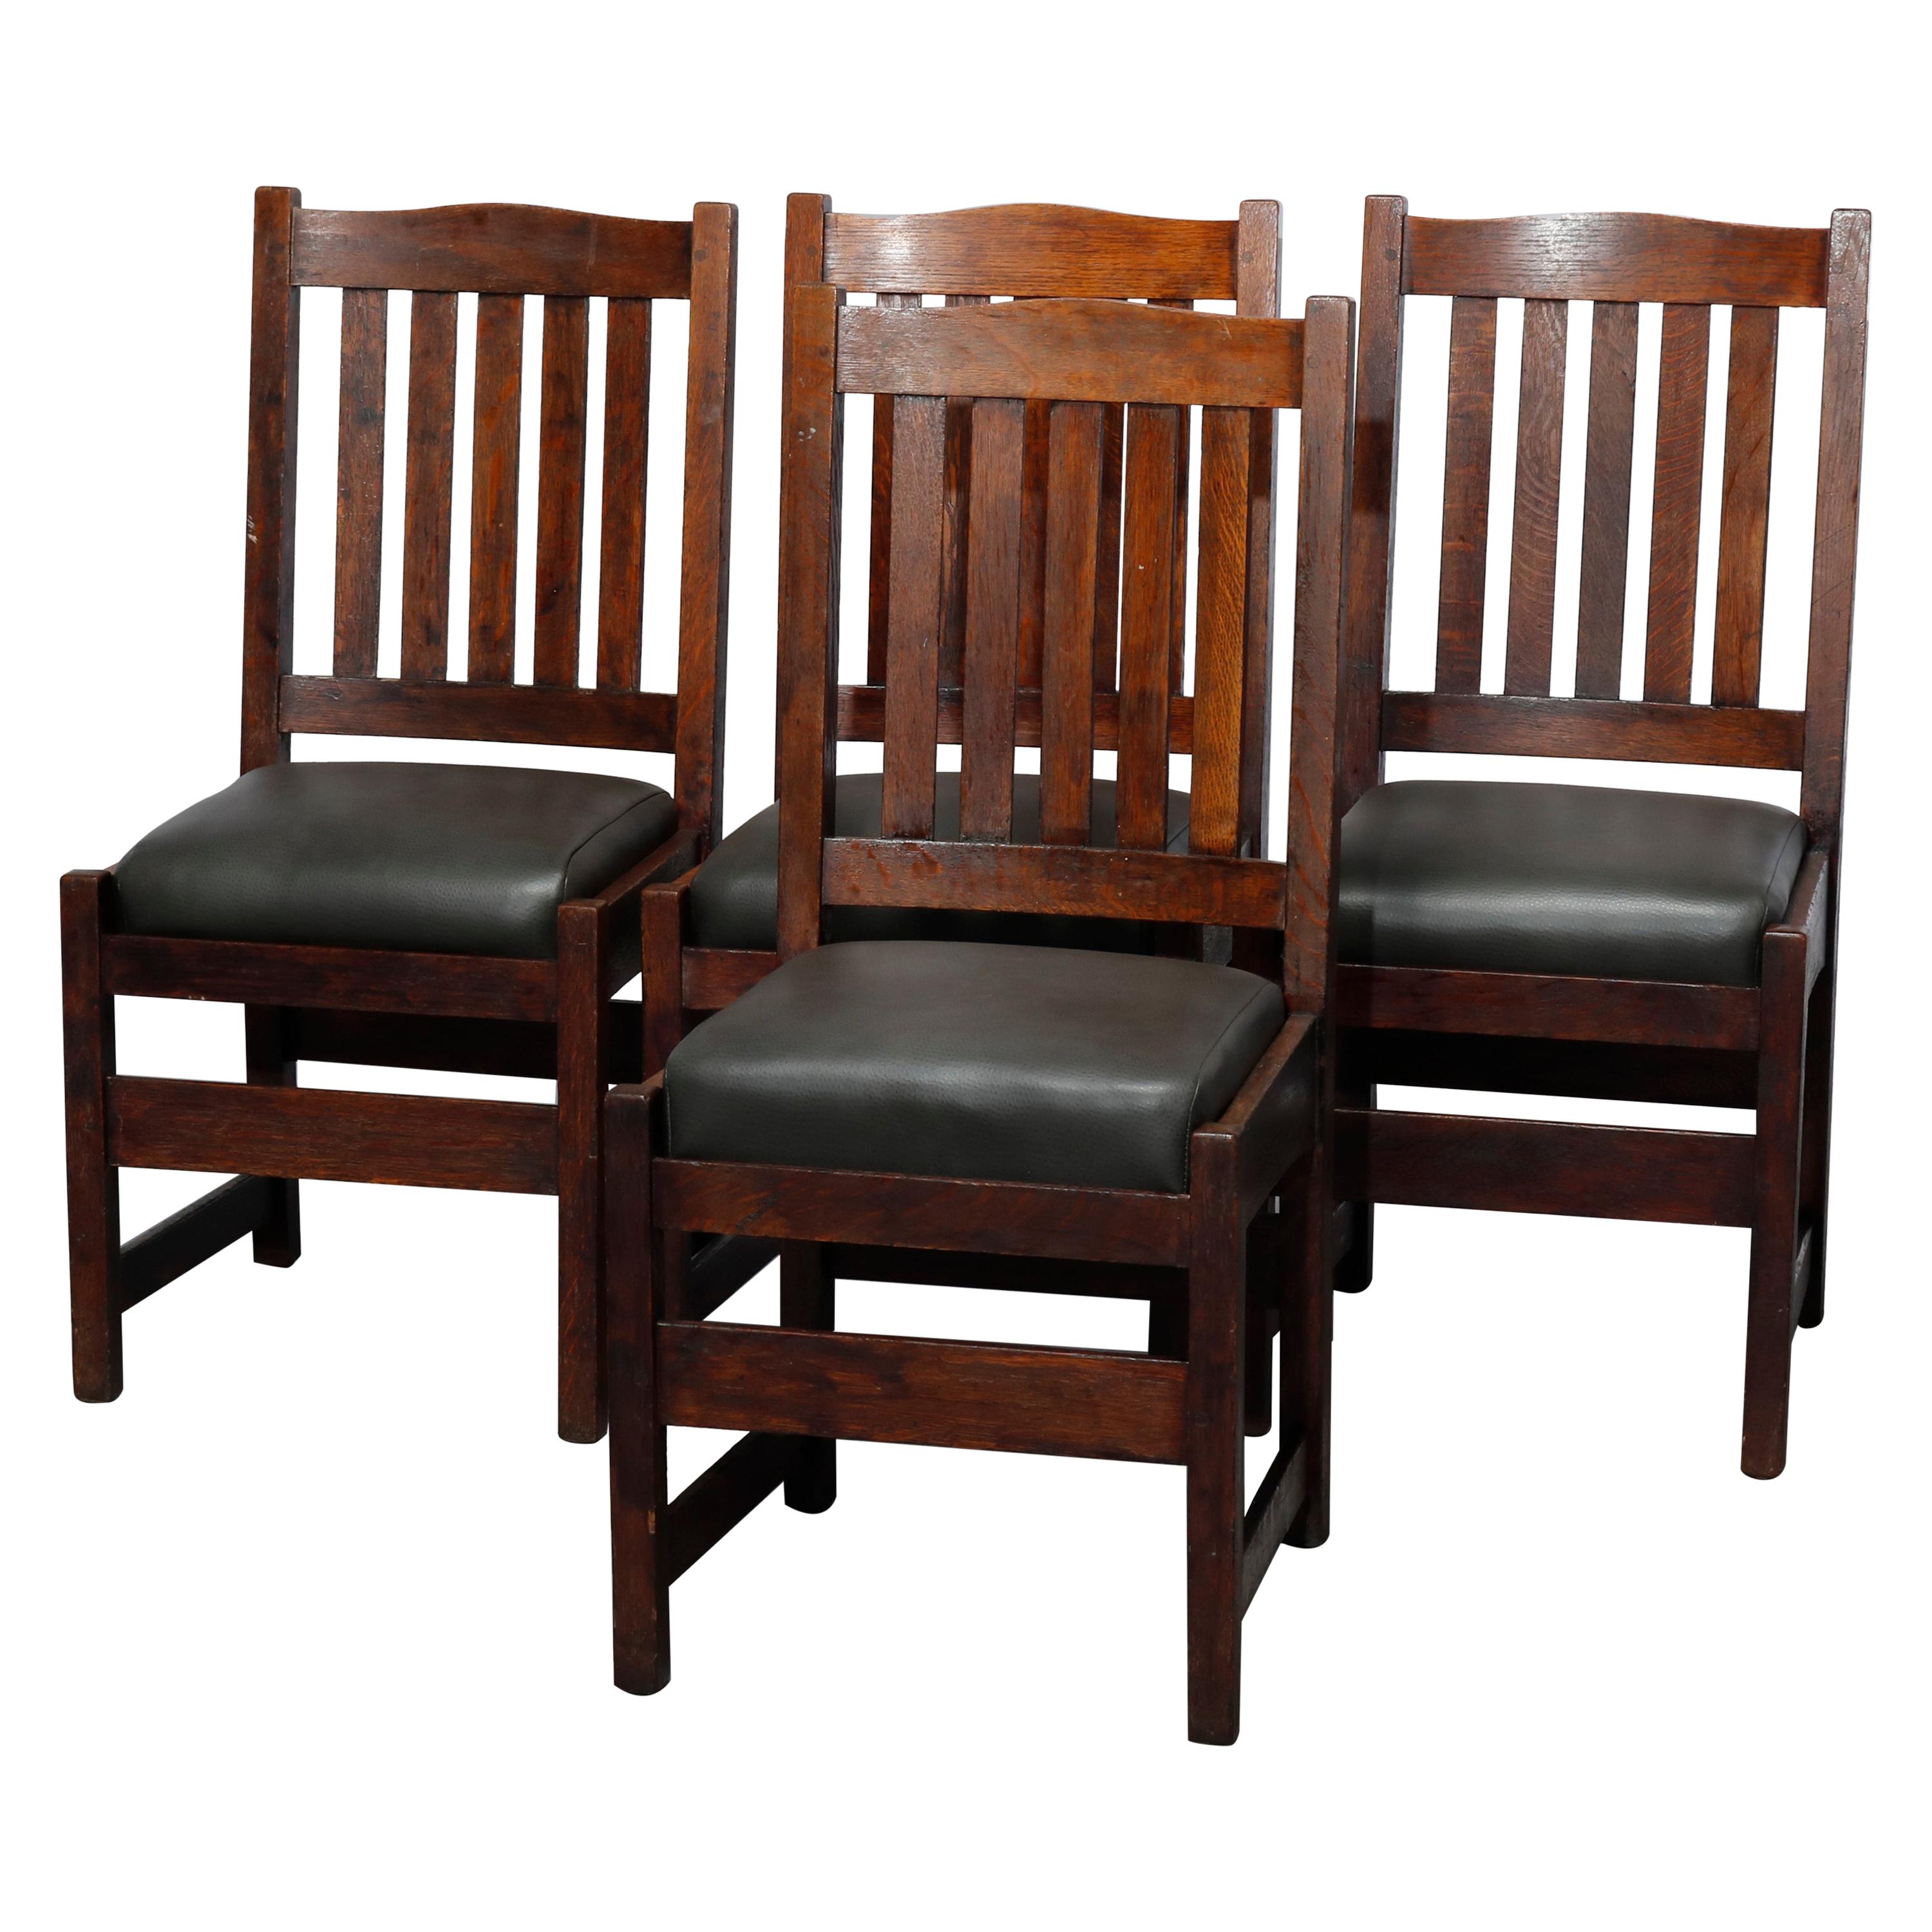 Four Arts & Crafts L&JG Stickley Mission Oak & Leather Dining Chairs, c1910